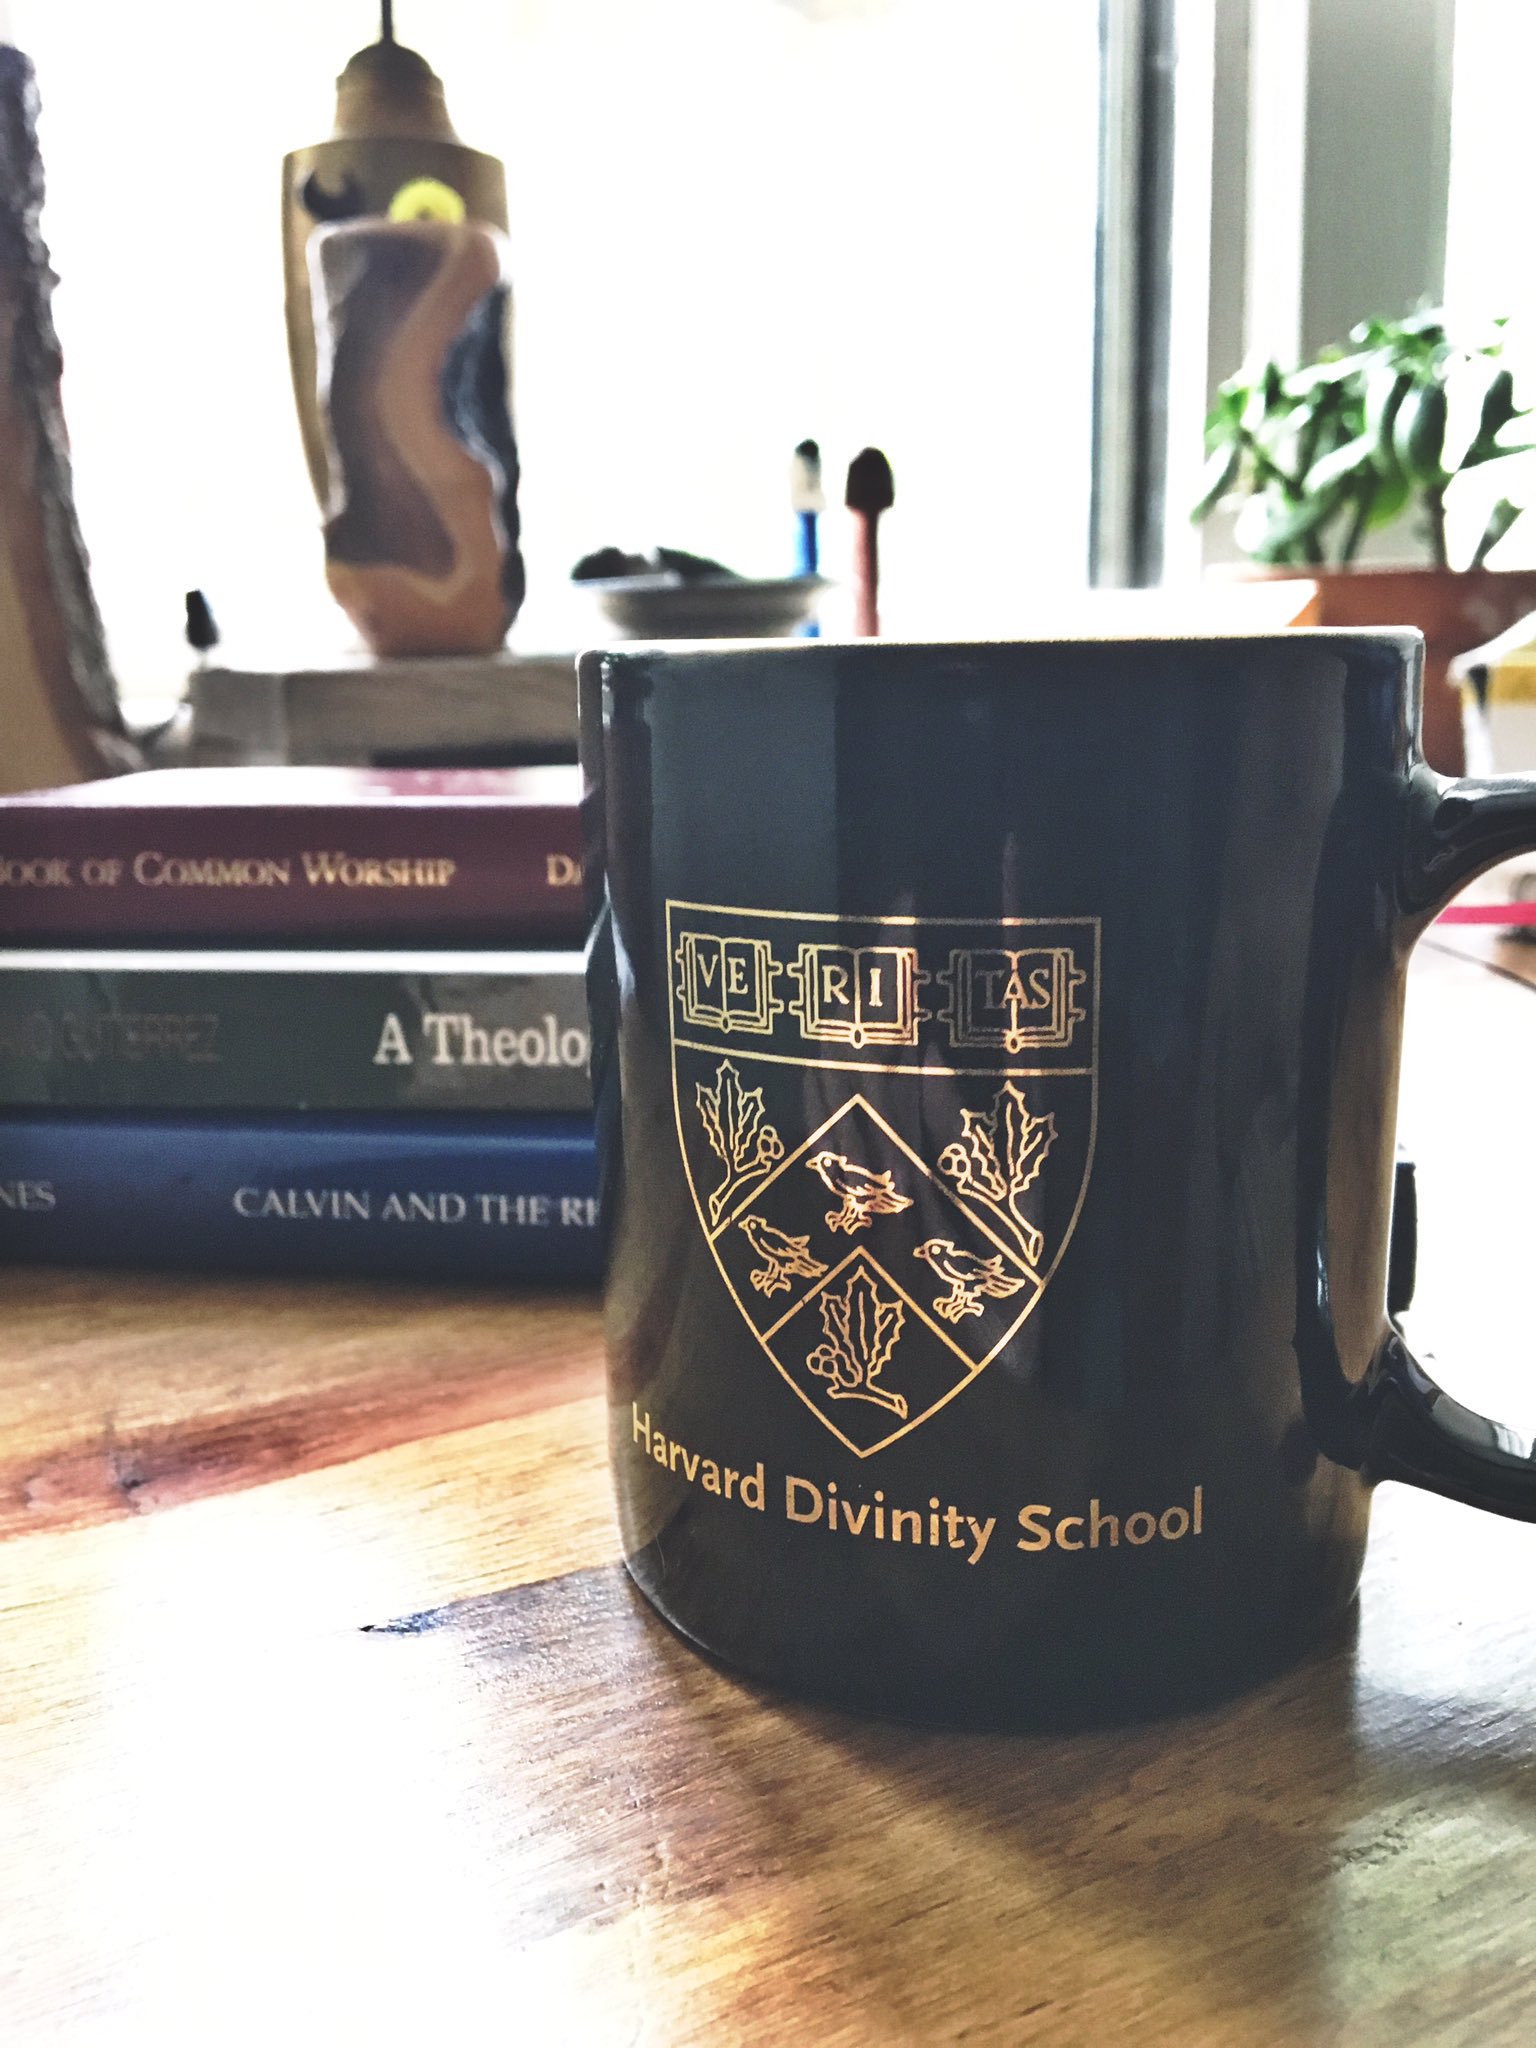 Thinking of my fellow @HarvardDivinity grads at #HDS200 this morning.

Sad I'm not there, but someone shout the frisbee chant for me! https://t.co/bWPOJJV6F3